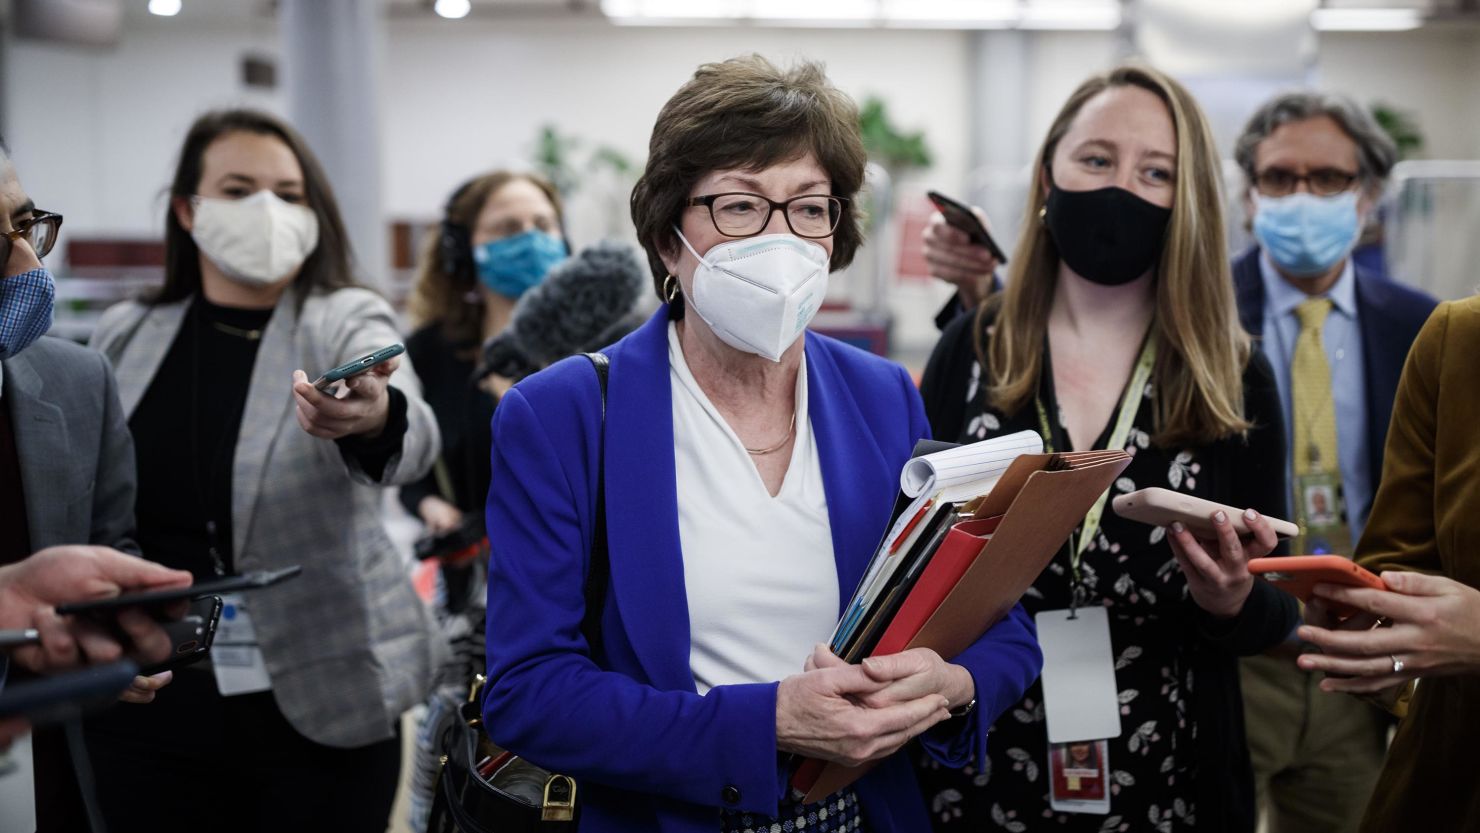 Senator Susan Collins, a Republican from Maine, speaks to members of the media in the Senate Subway at the U.S. Capitol in Washington, D.C., U.S., on Thursday, Feb. 11, 2021.